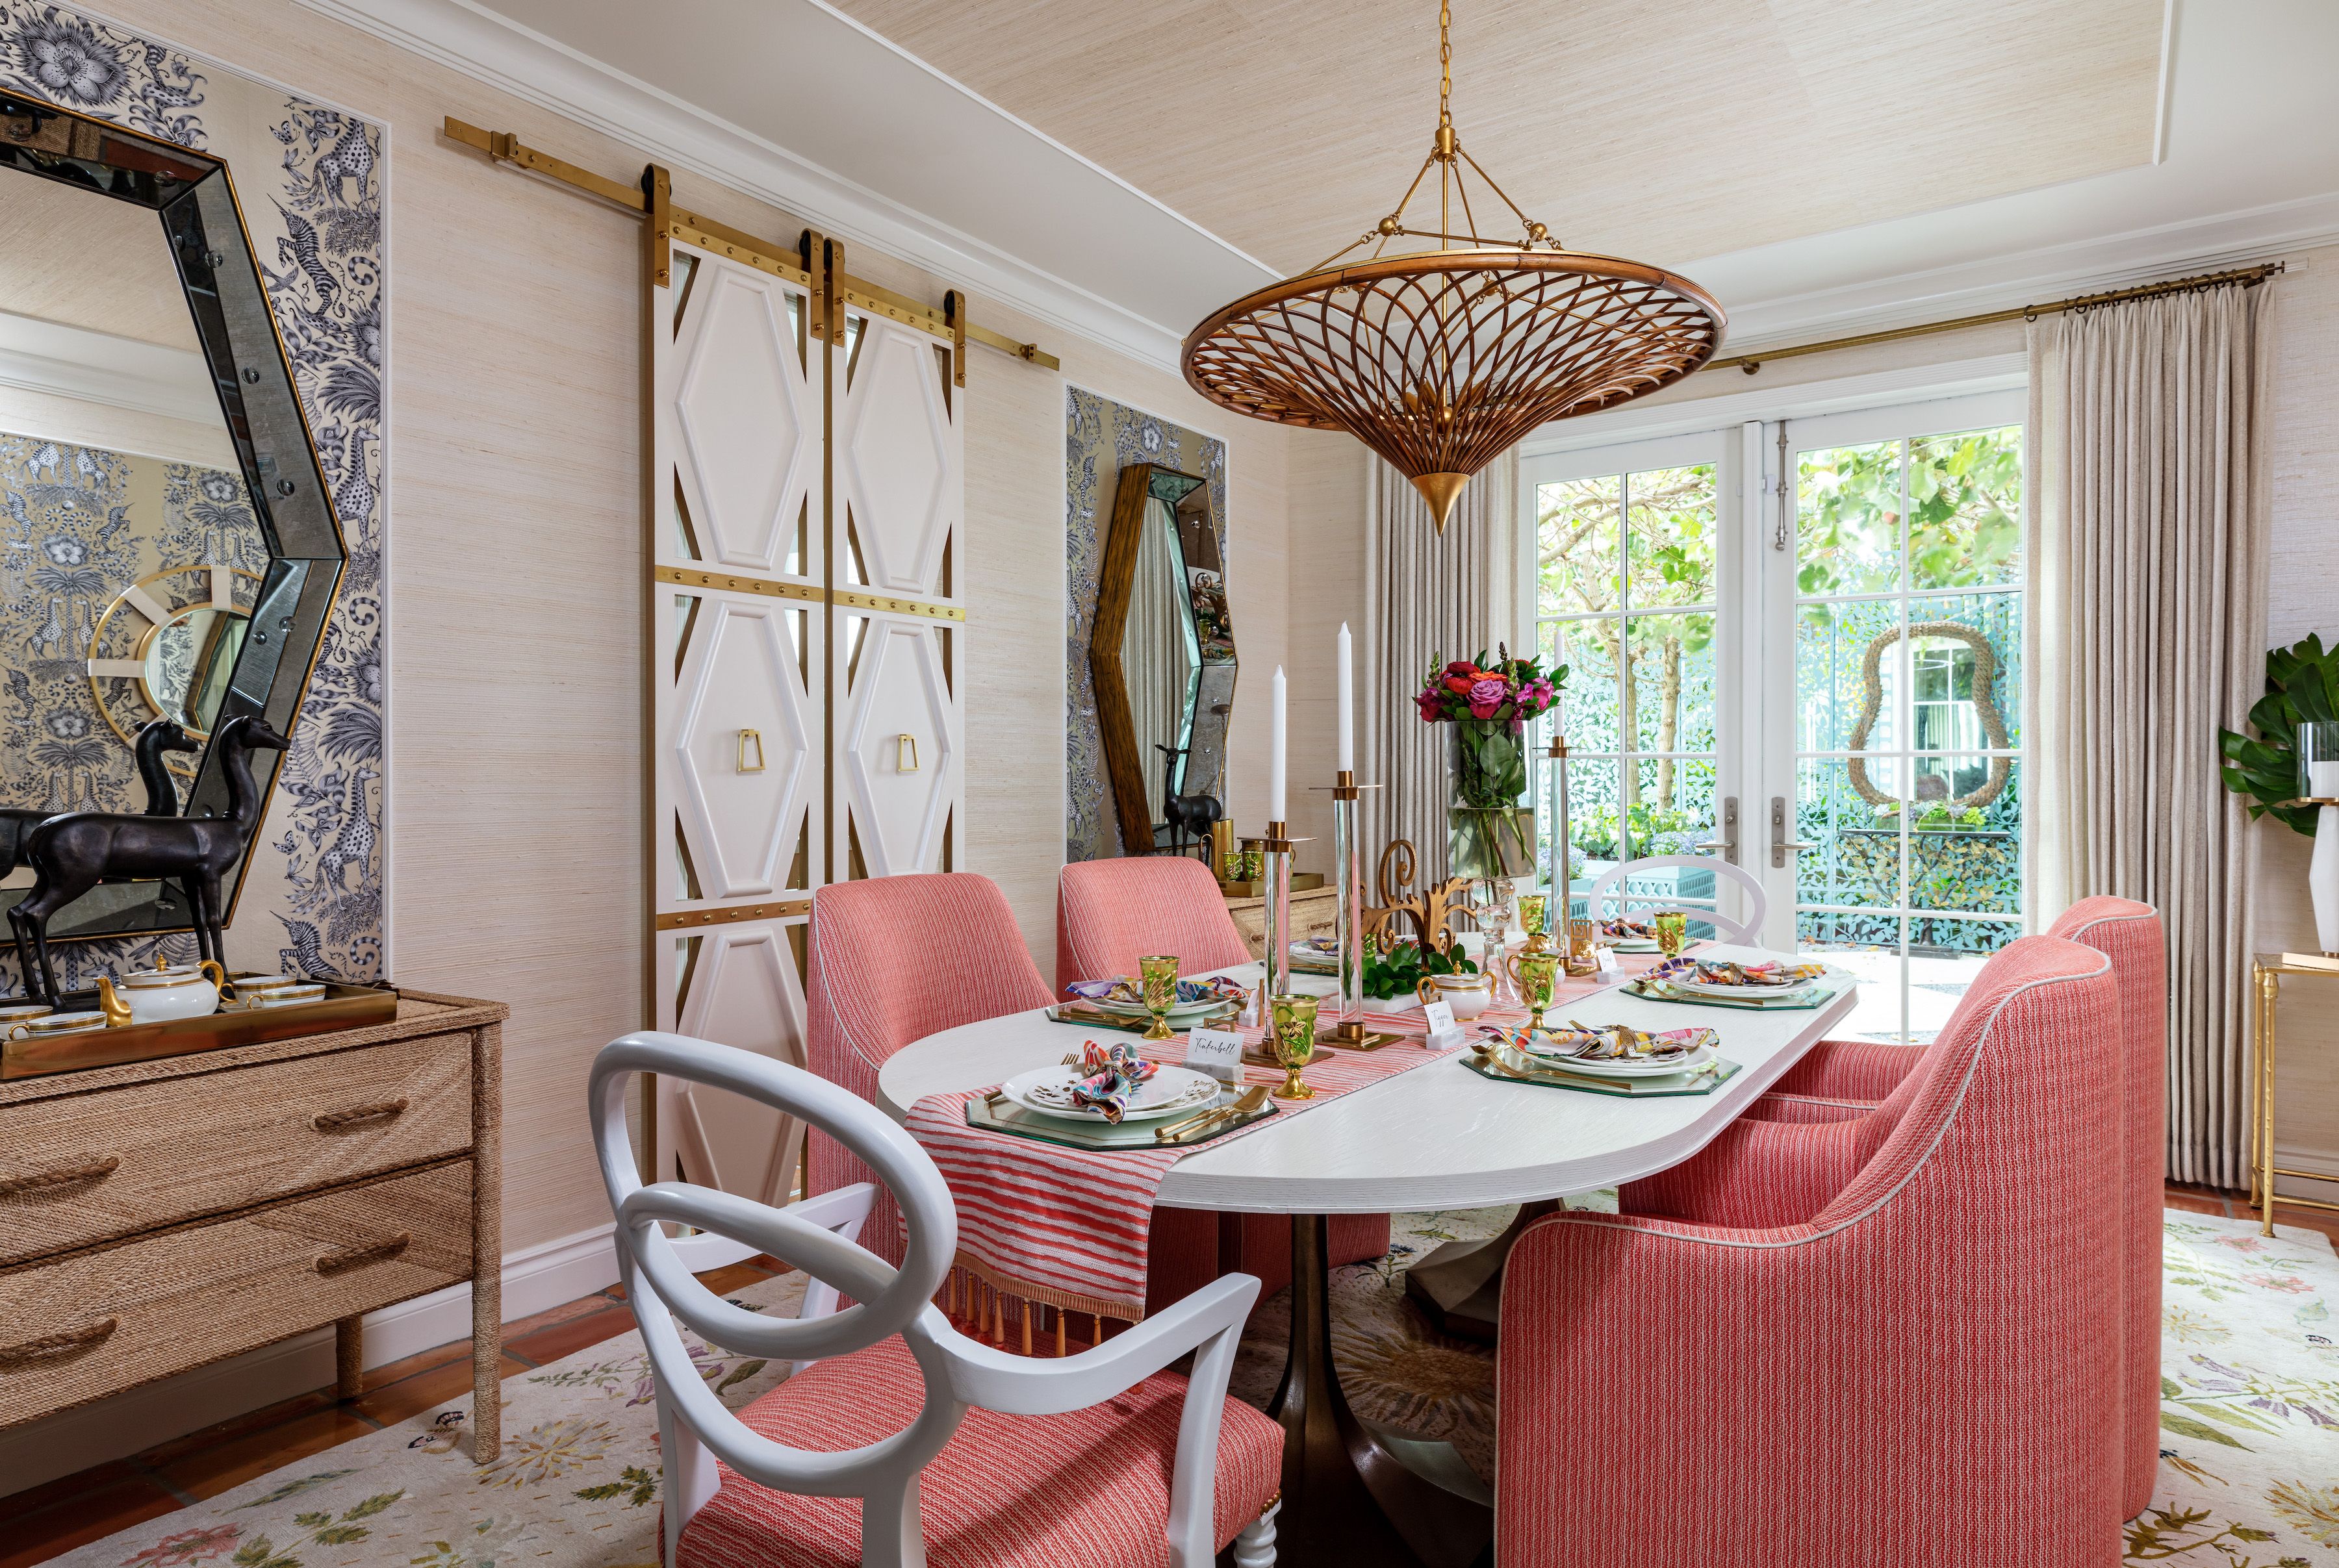 A Traditional Home Gets a Fresh Twist  Part I  The Dining Room   Terravista Interior Design Group